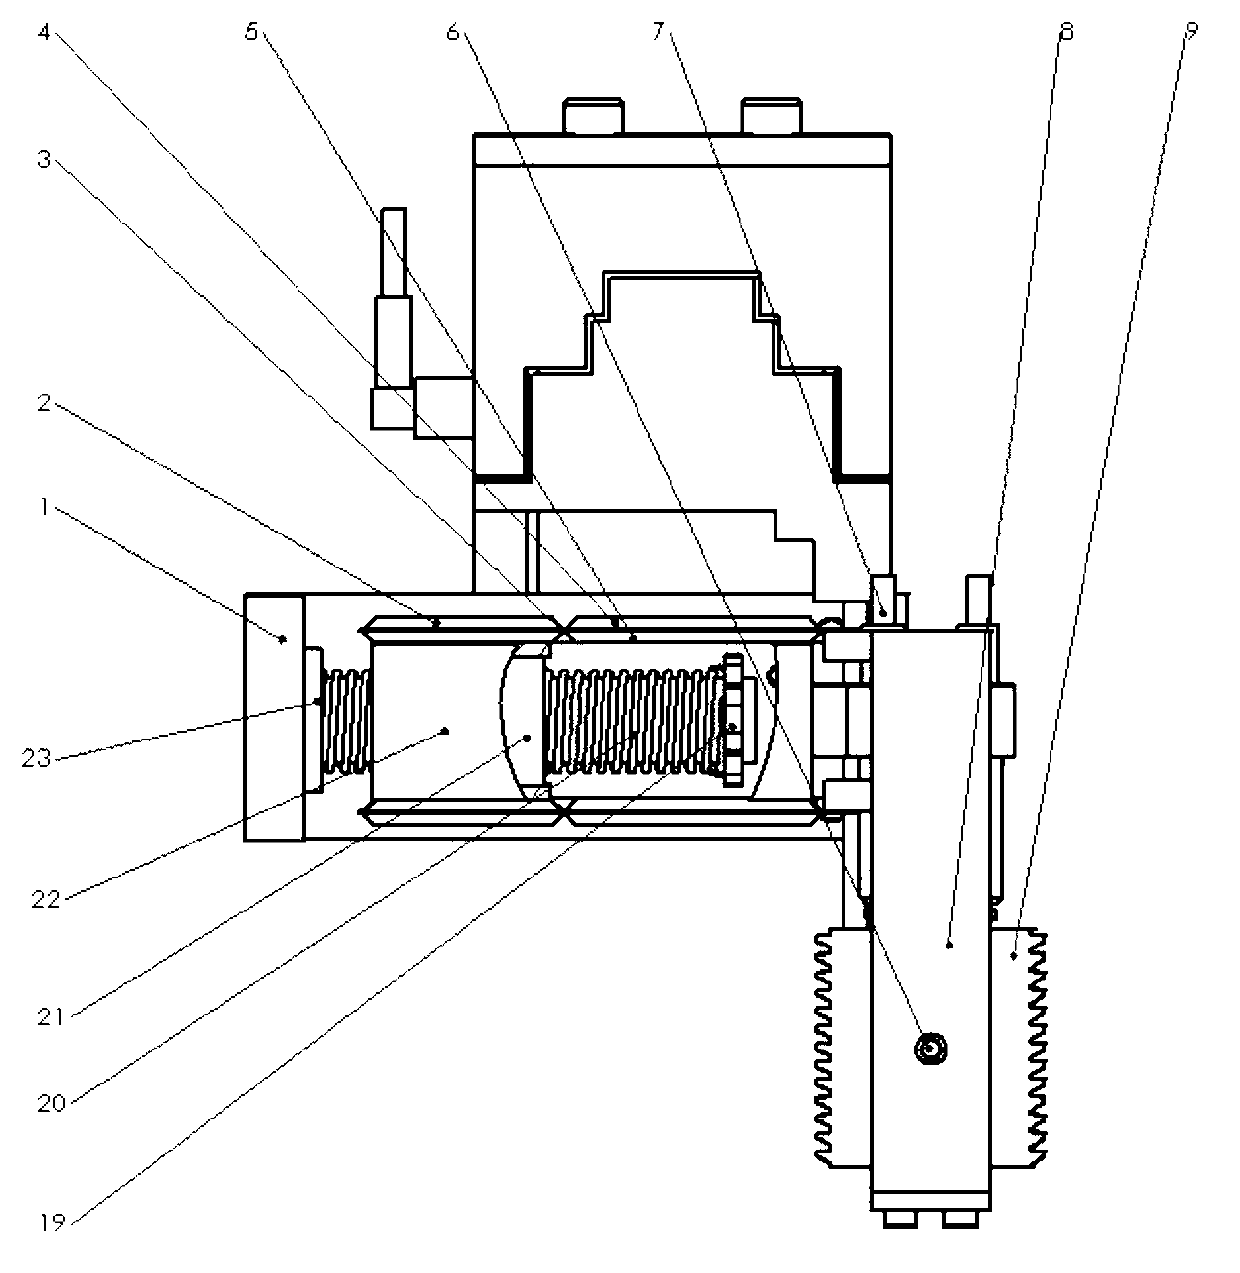 Measuring head calibration method of thread combined function dimensional measurement instrument